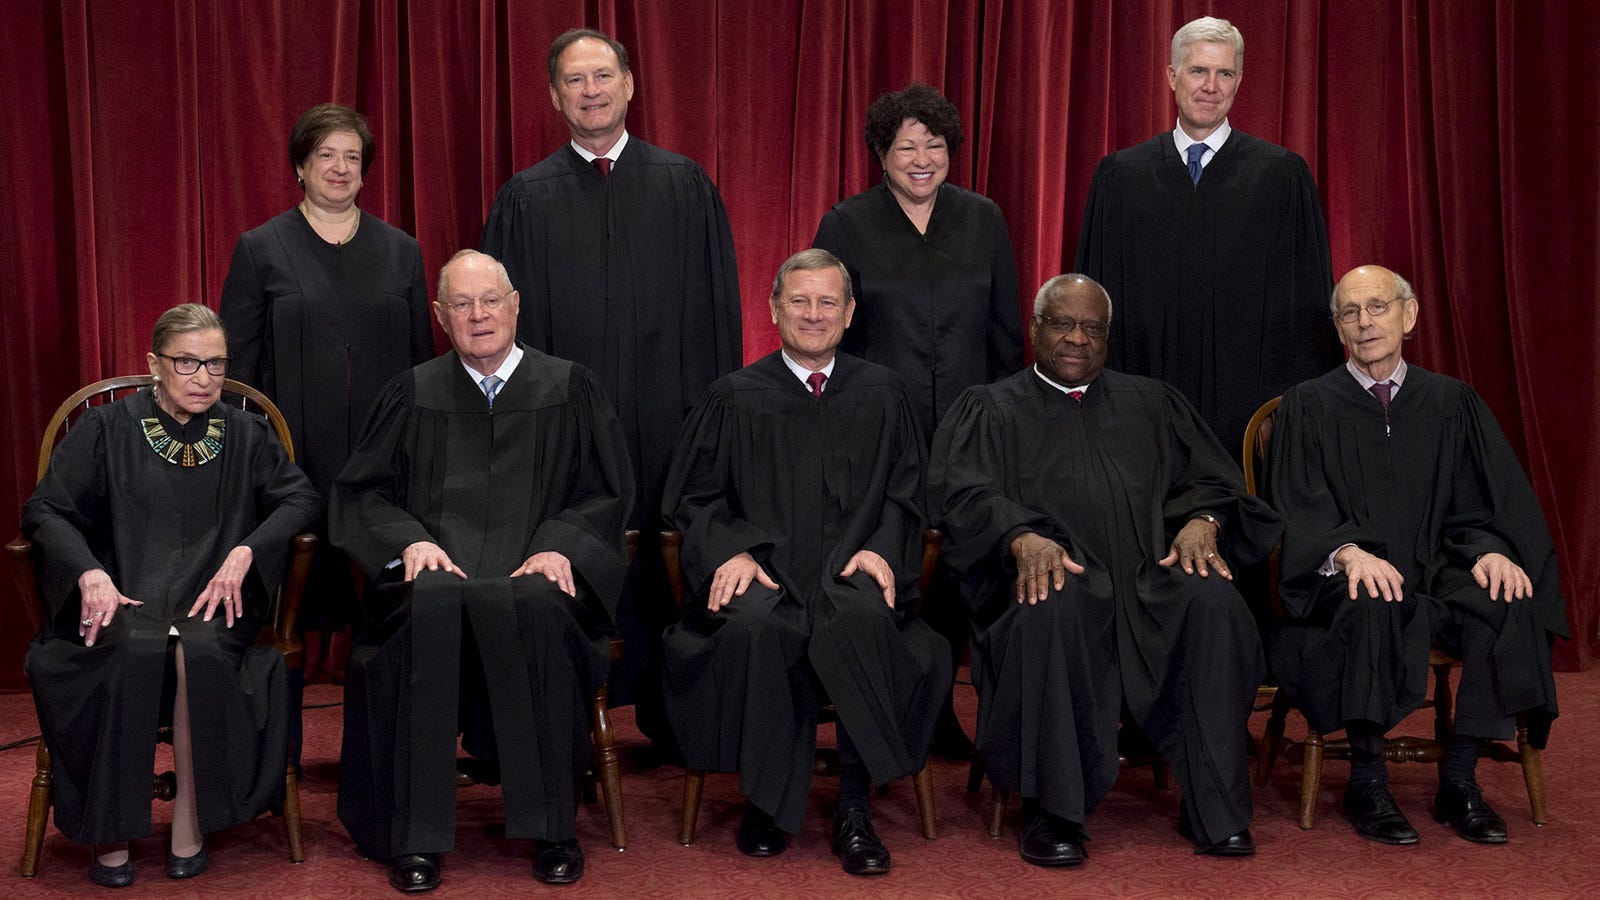 Supreme Court Votes 7-2 To Legalize All Worldly Vices